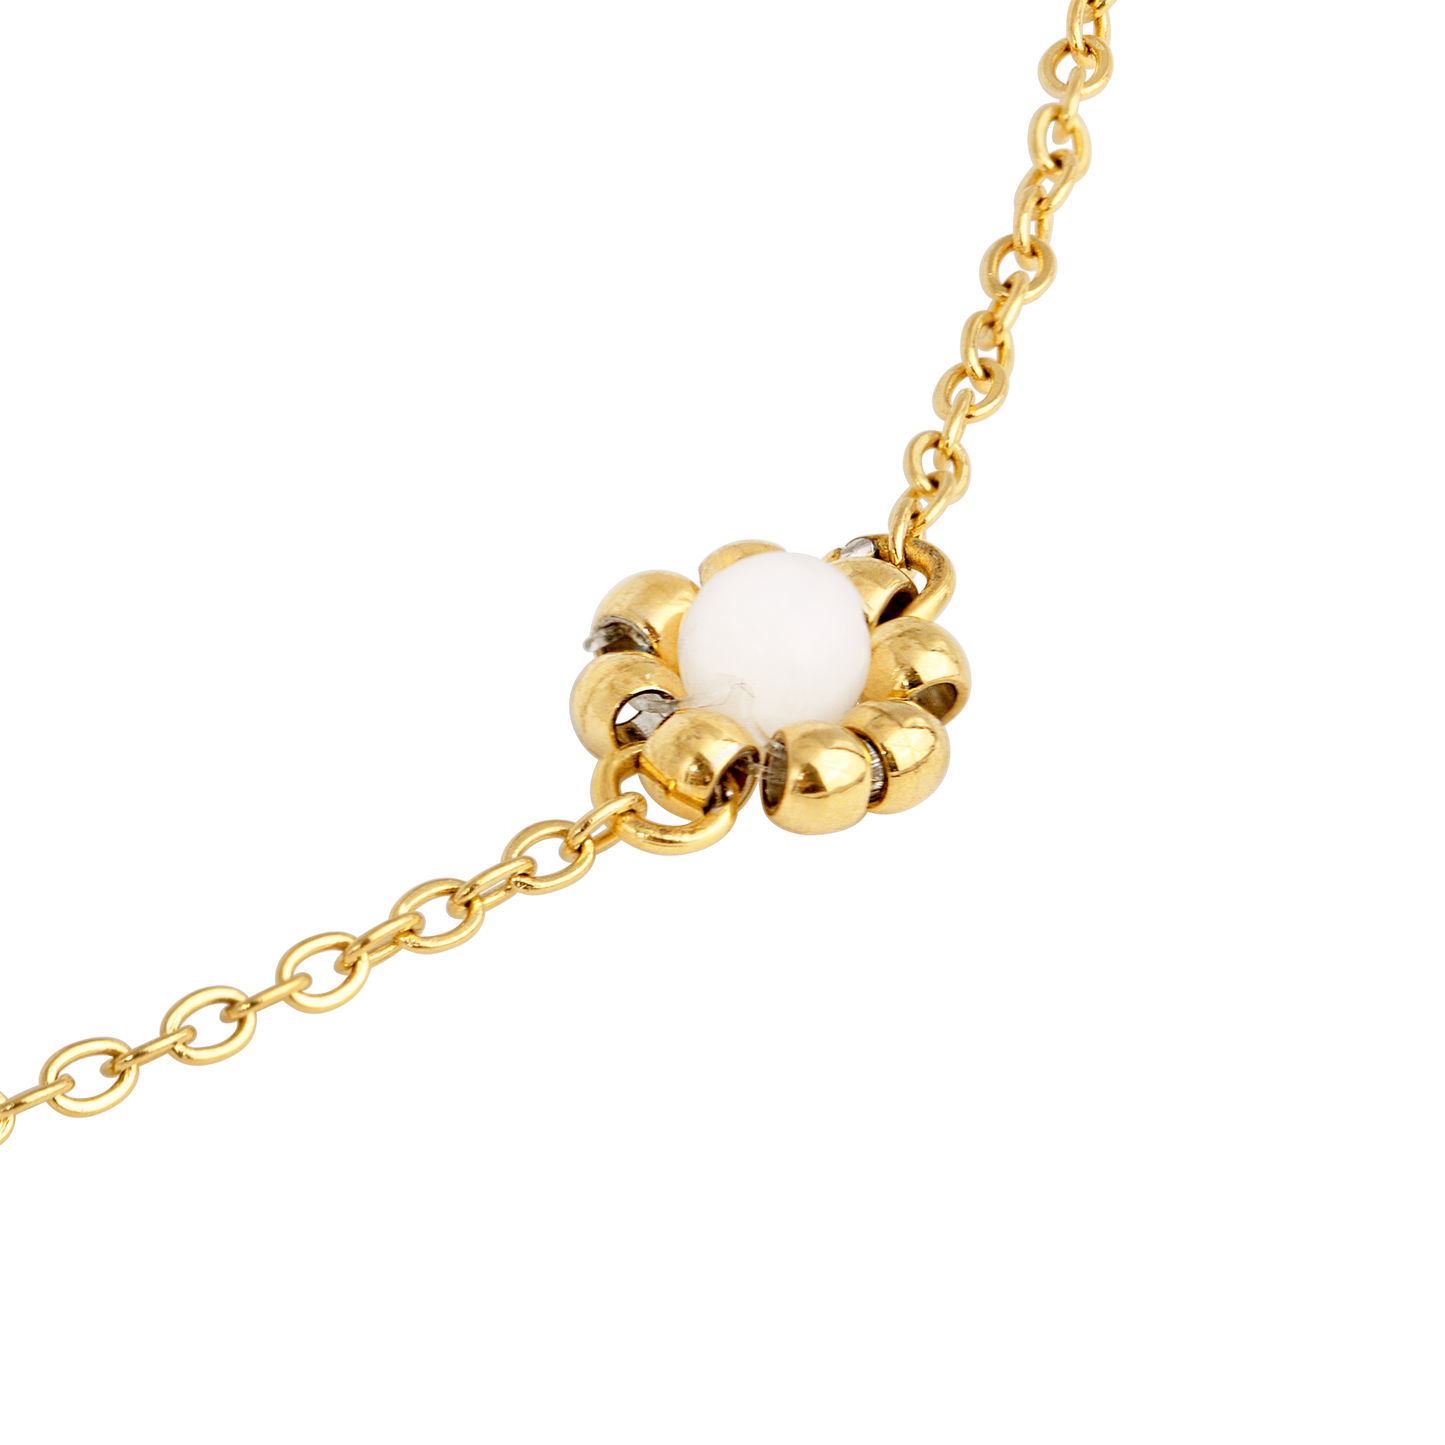 Flower 'n' Beads Necklace Gold